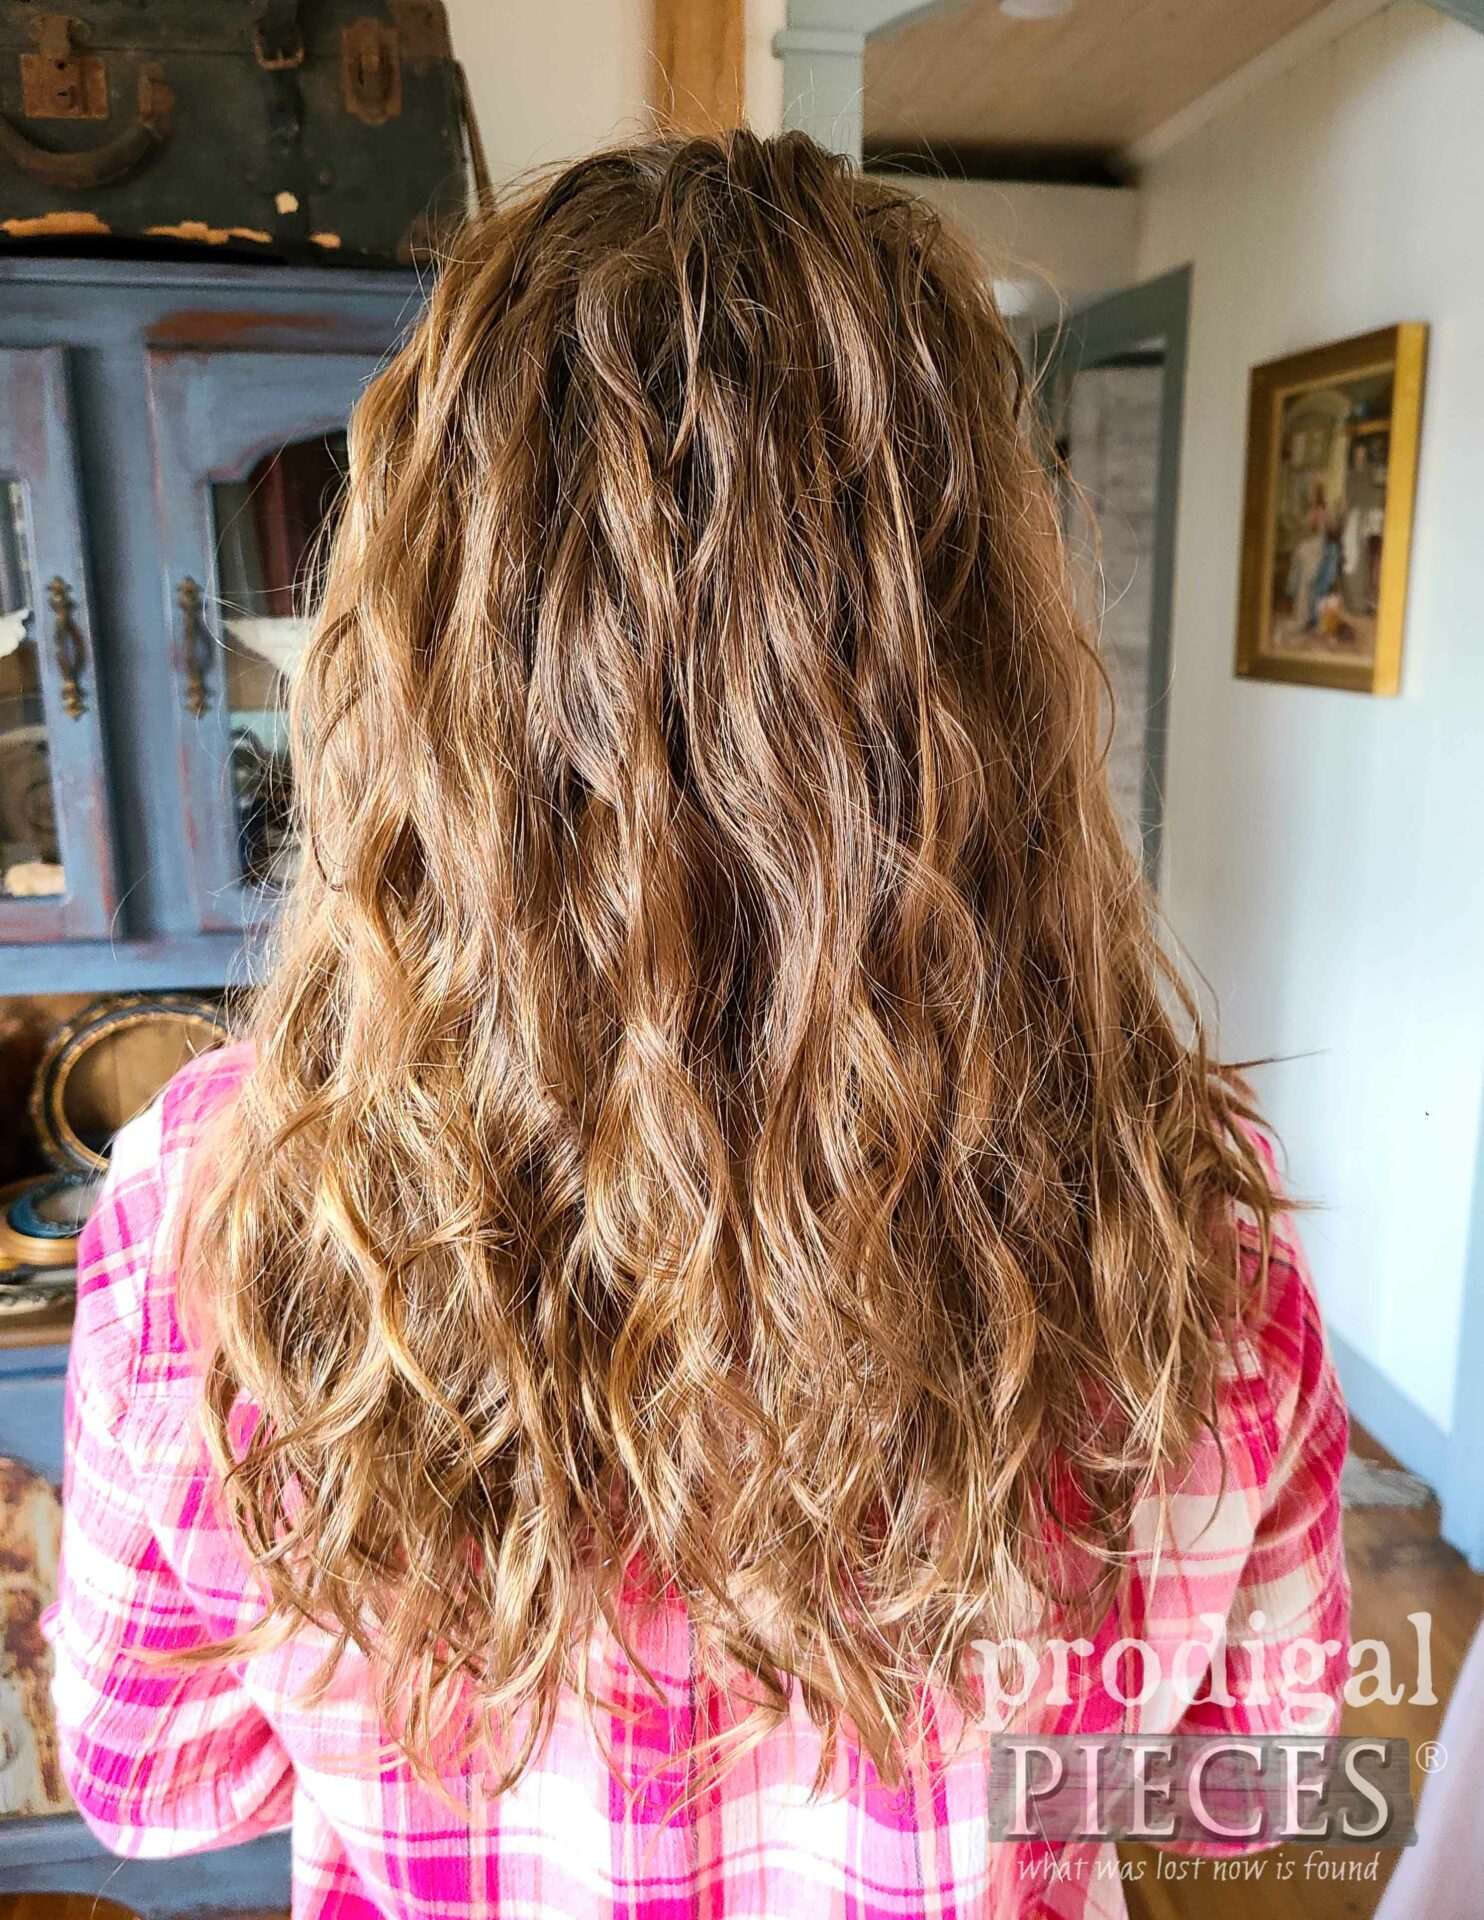 Daughter's Wavy Hair Girl Journey | 8 weeks result | prodigalpieces.com #prodigalpieces